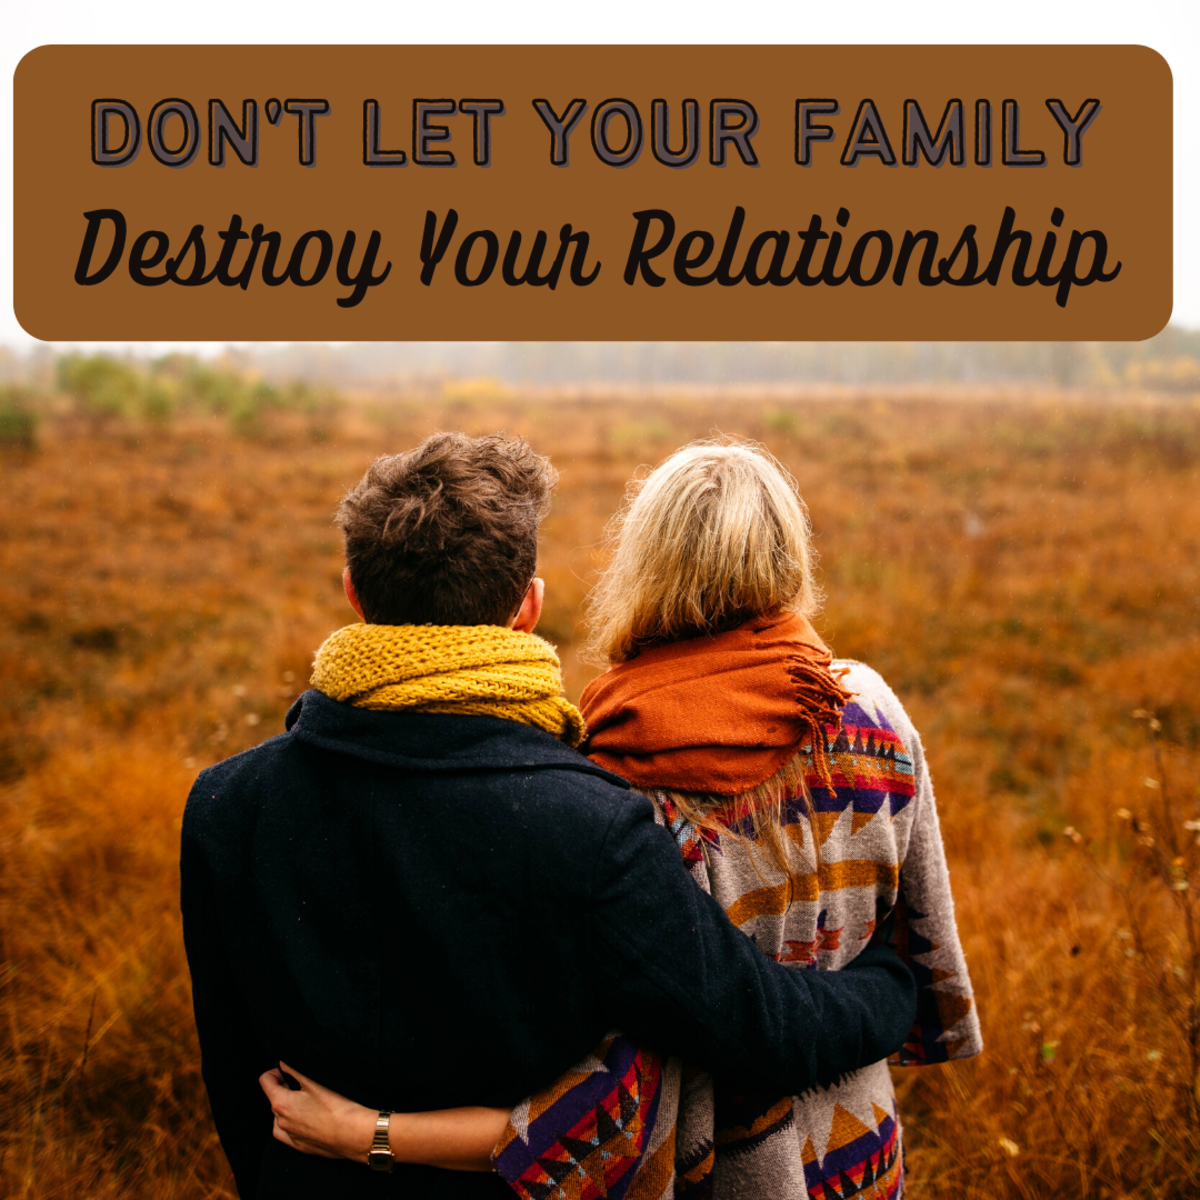 How to Keep Your Family From Ruining Your Relationship